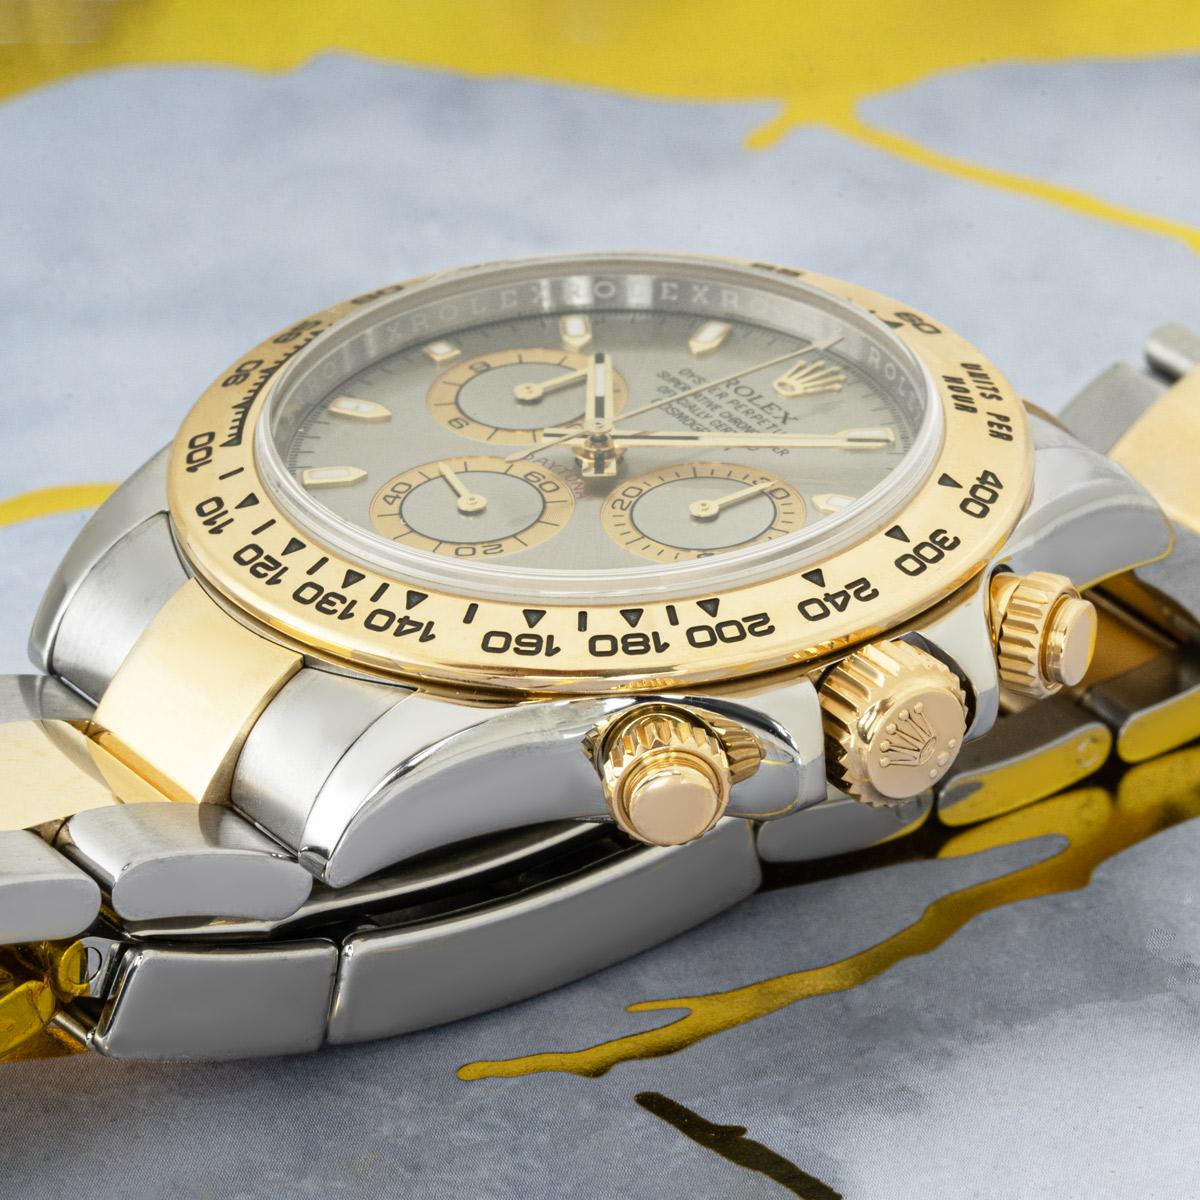 A Cosmograph Daytona by Rolex in Oystersteel and yellow gold. Featuring a grey dial with applied hour markers and an engraved tachymetric scale, three counters and pushers; the Daytona was designed to be the ultimate timing tool for endurance racing